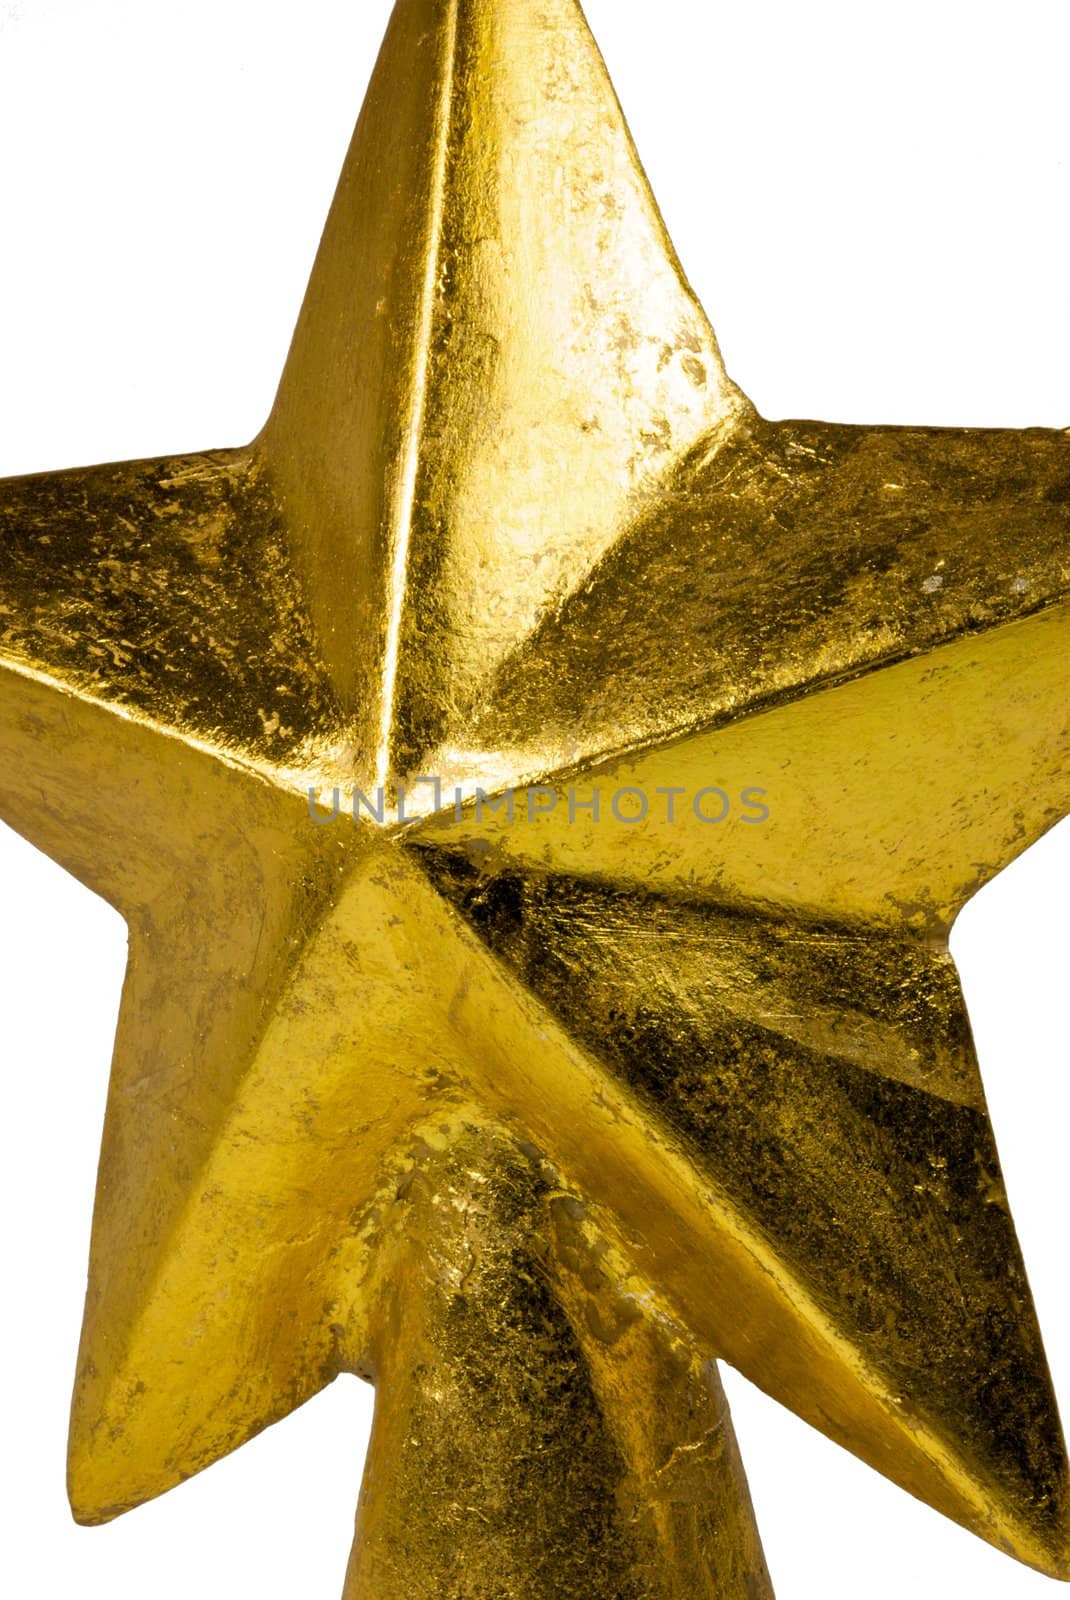 Isolated Gold Star by pixelsnap